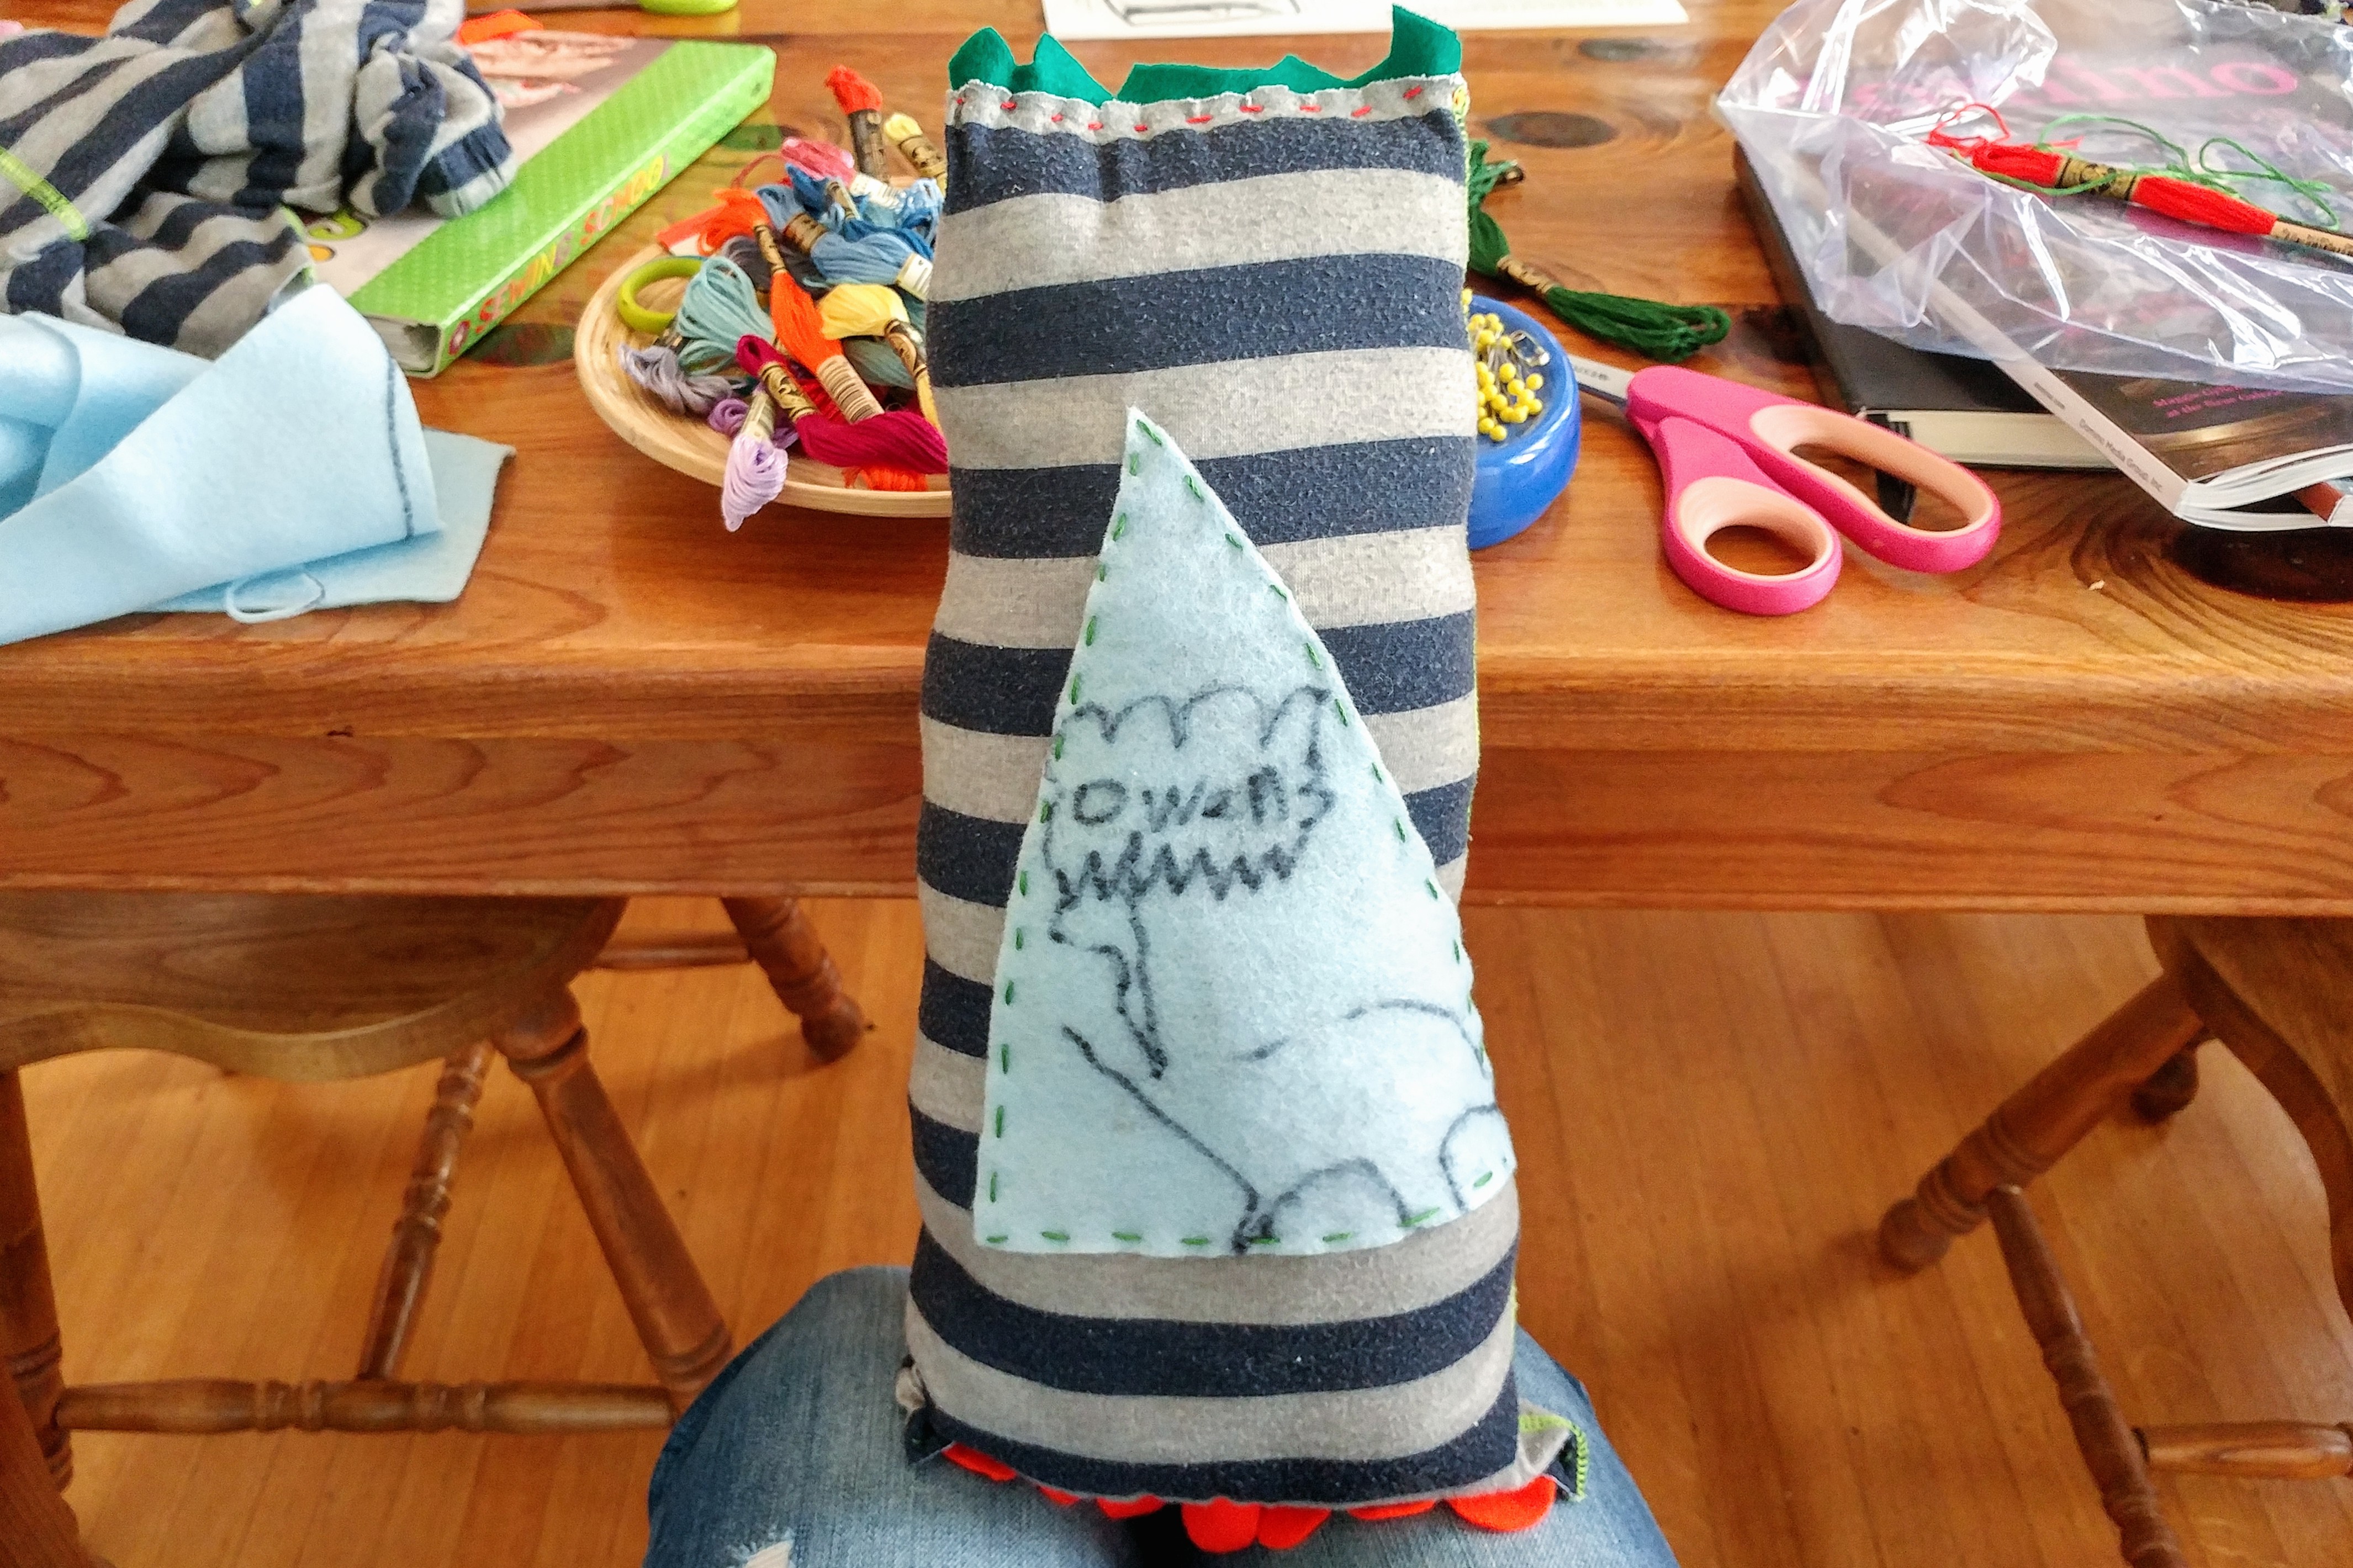 Upcycled pillow out of outgrown pajamas. So fun! â€“ https://www.kimwerker.com/blog